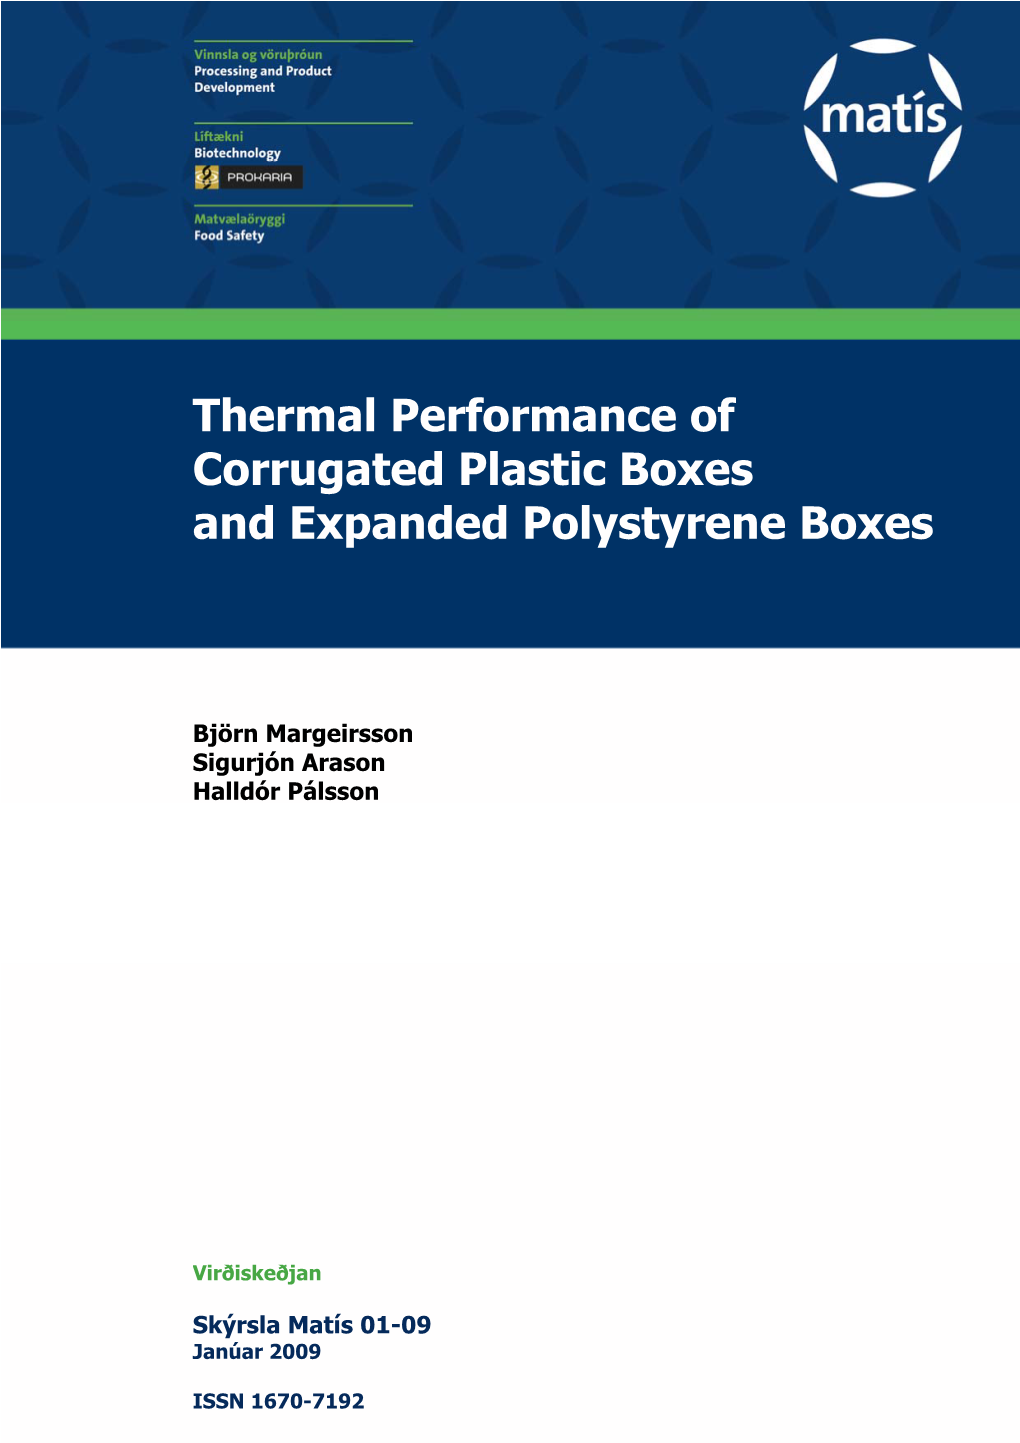 Thermal Performance of Corrugated Plastic Boxes and Expanded Polystyrene Boxes